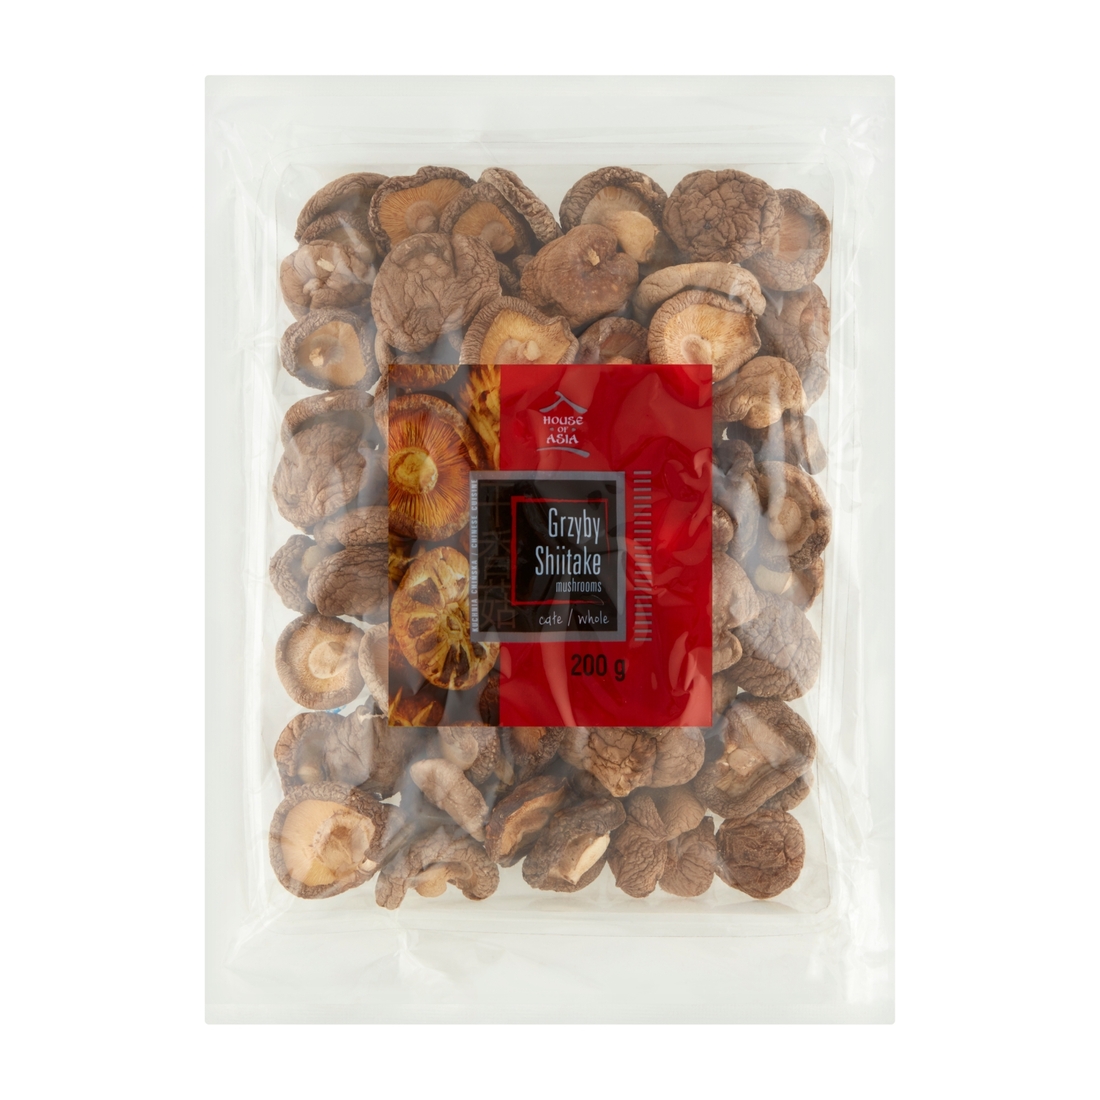 Grzyby Shiitake 200g House of Asia House of Asia